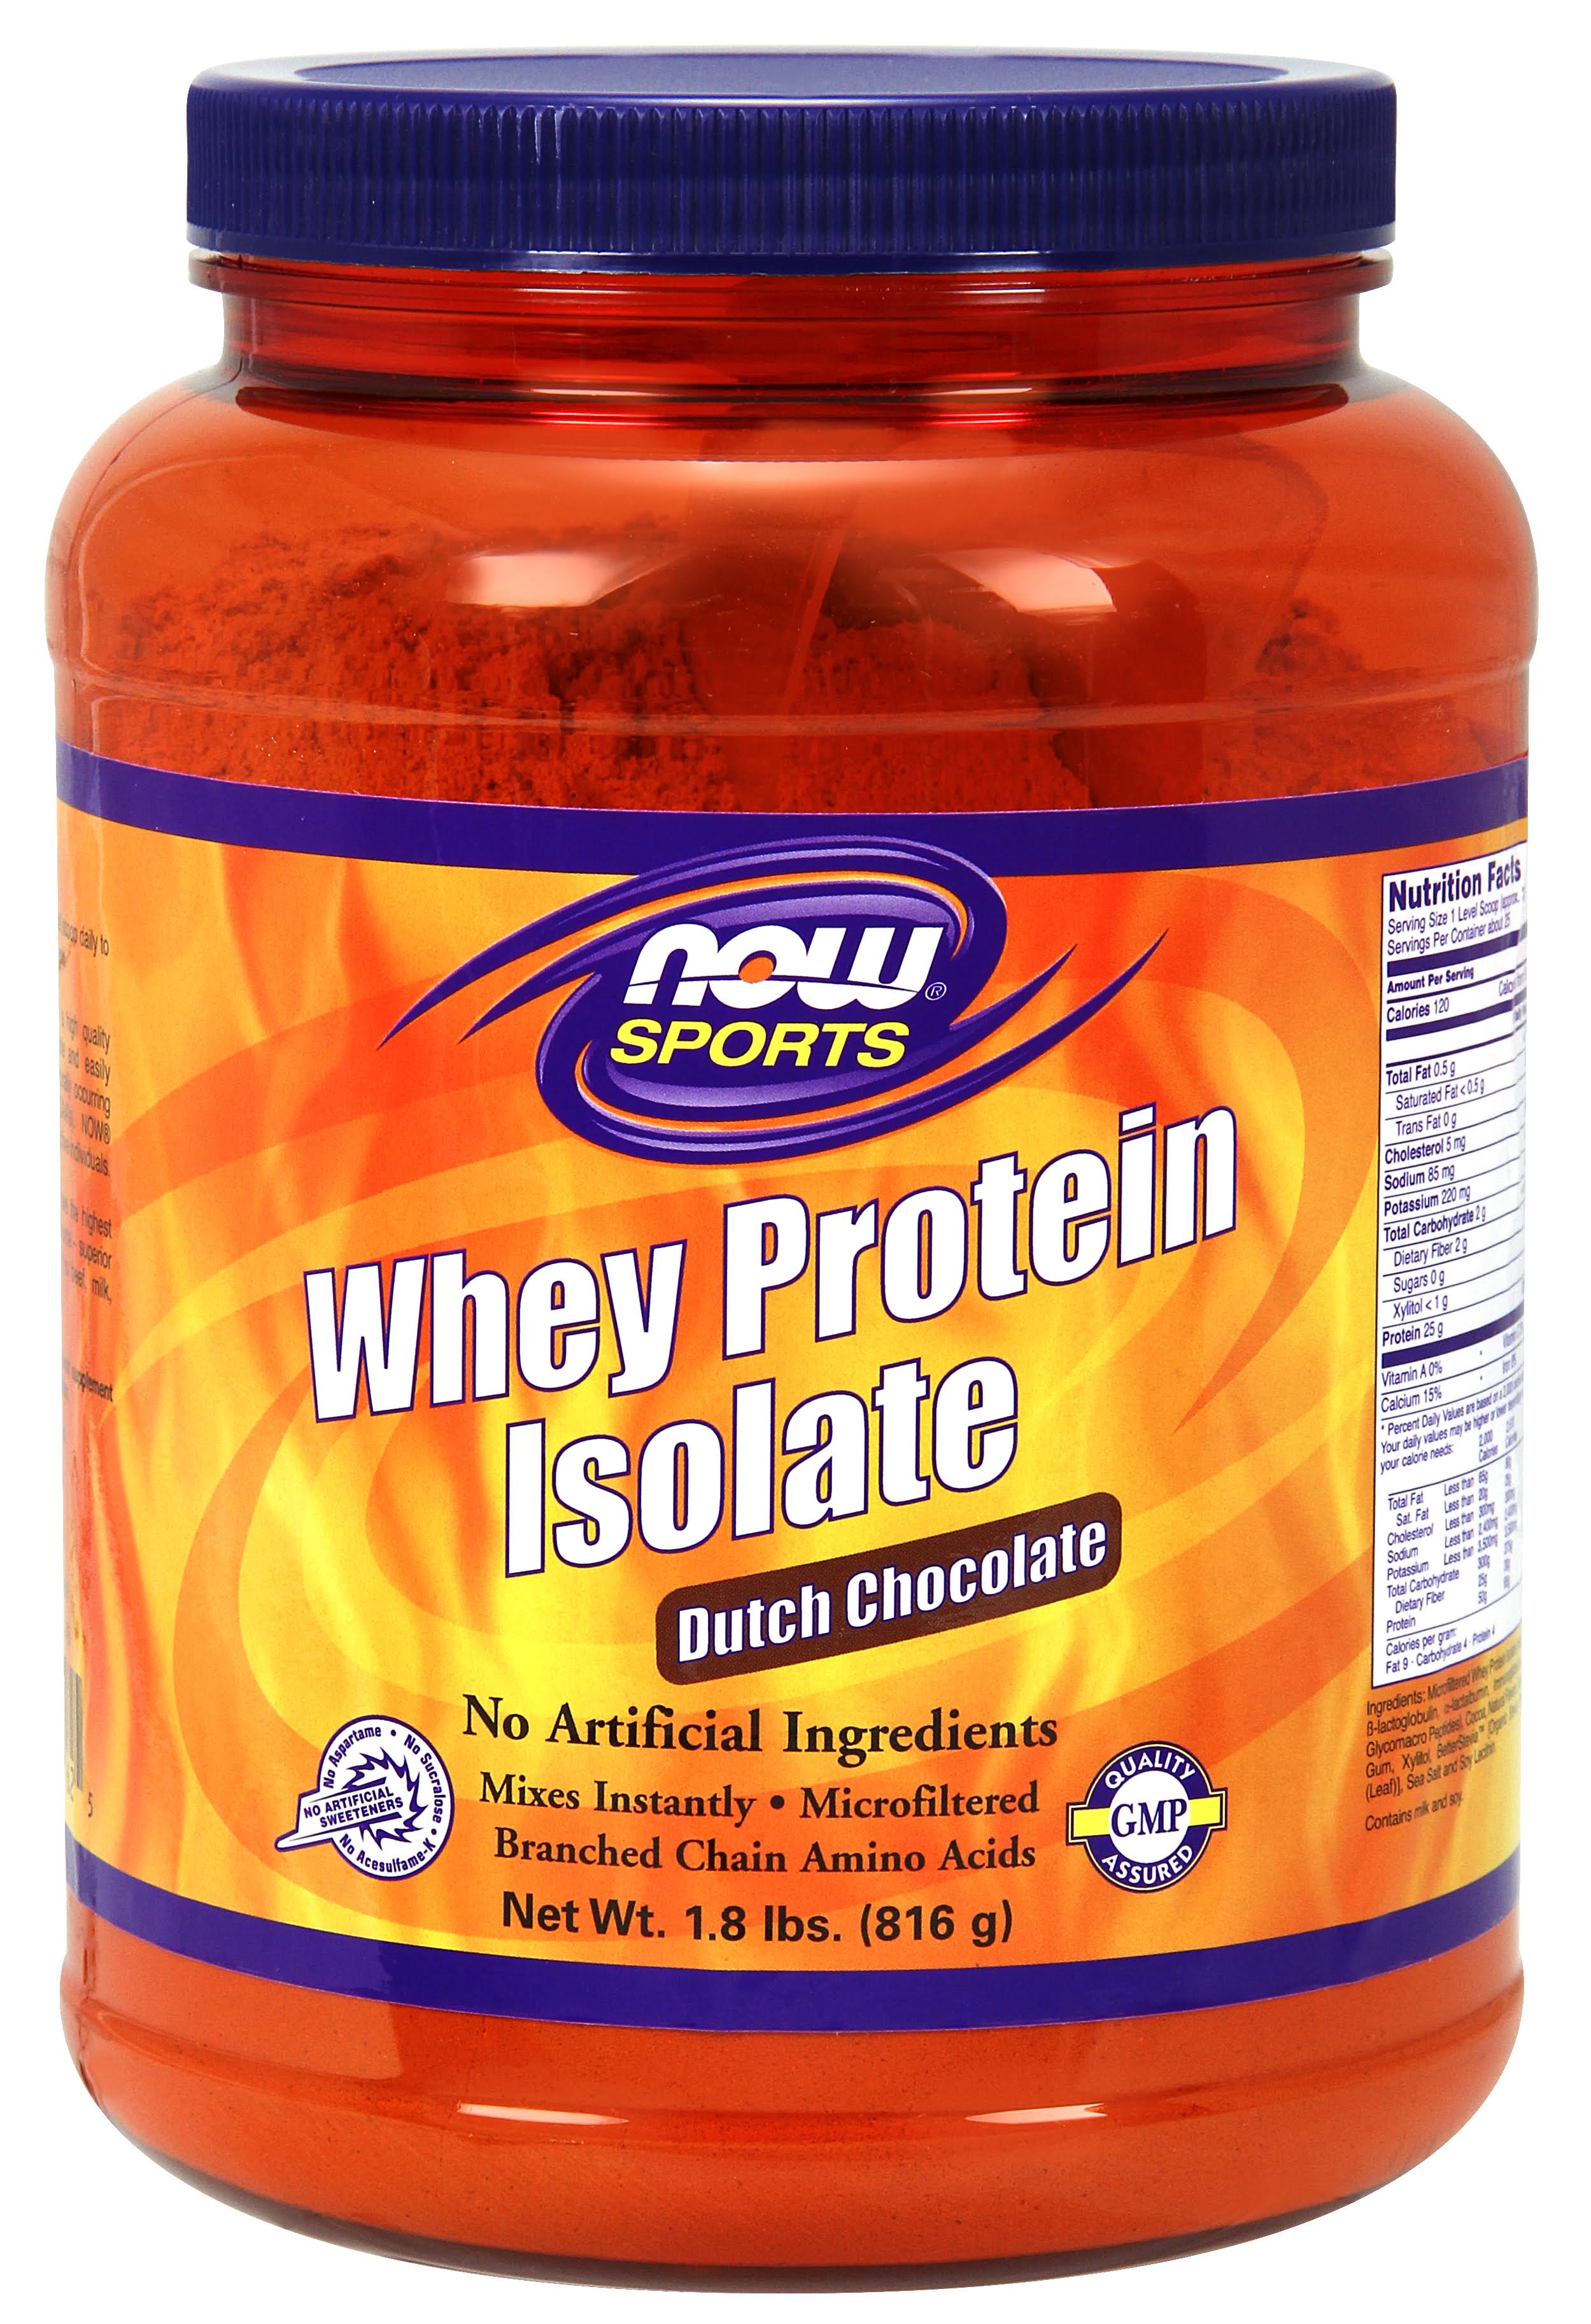 Now Foods Whey Protein Isolate Powder - Chocolate, 816g